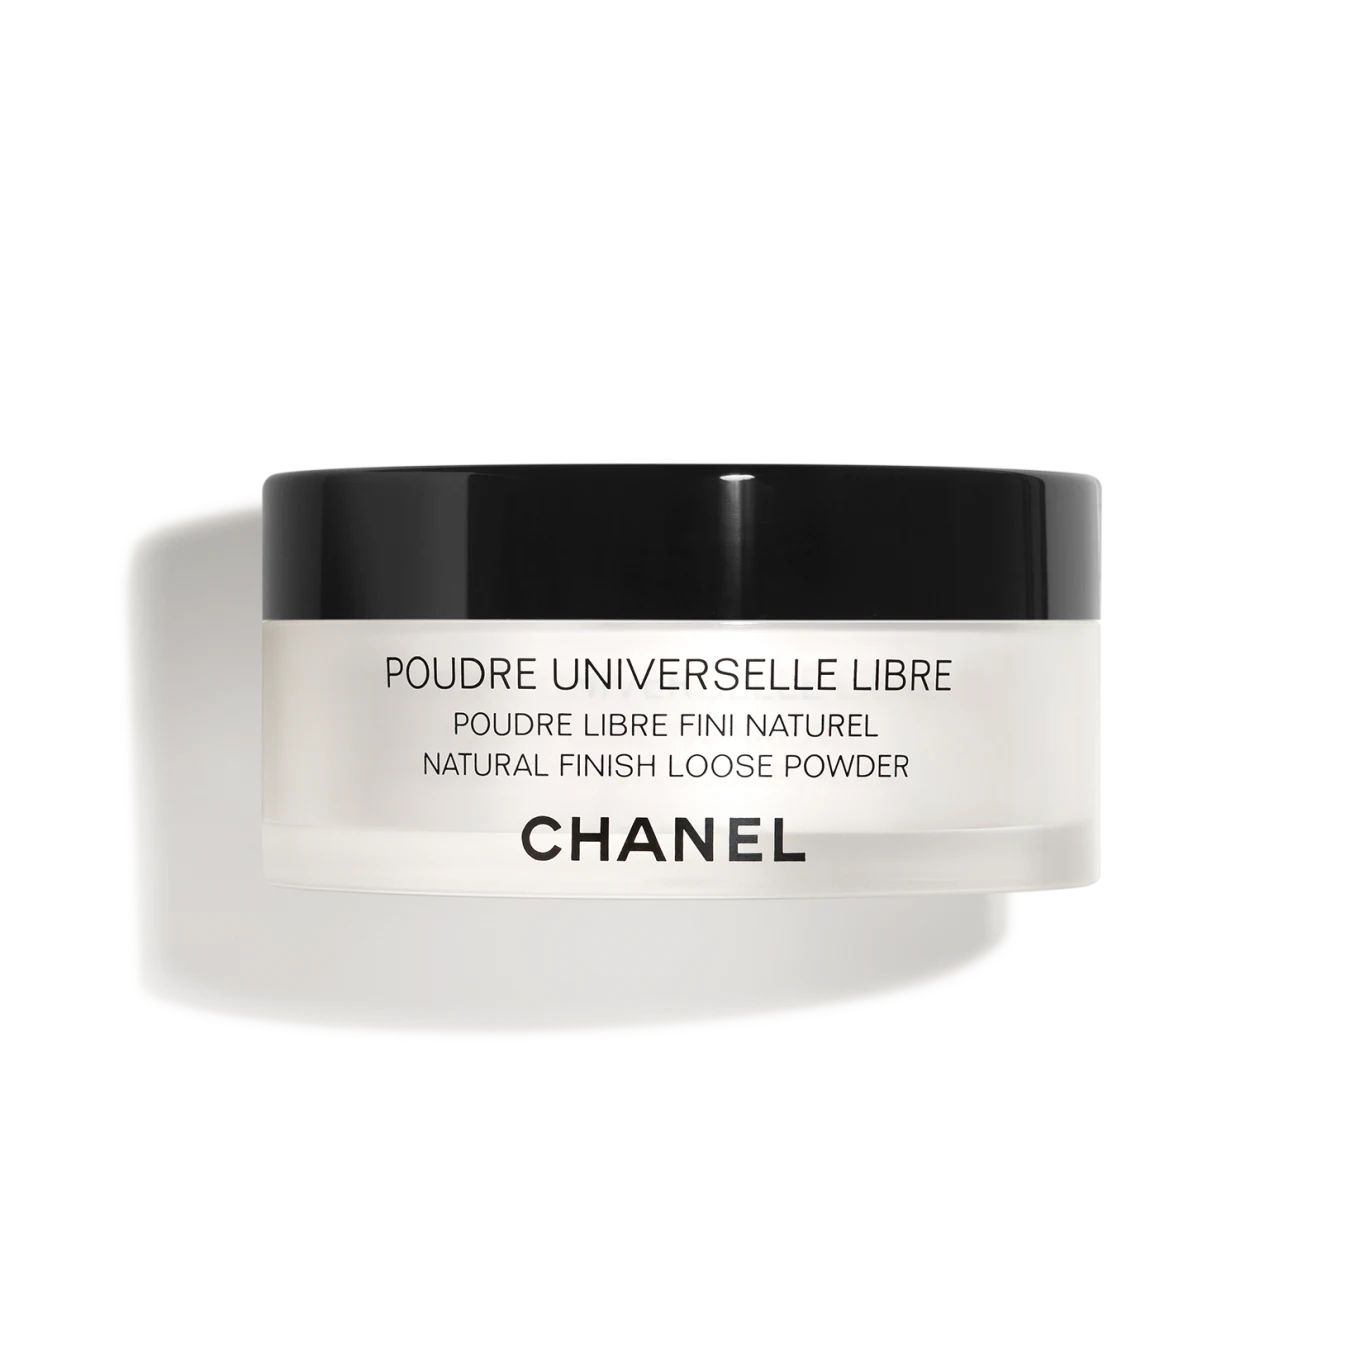 POUDRE UNIVERSELLE LIBRE Natural finish loose powder 12 | CHANEL | Chanel, Inc. (US)